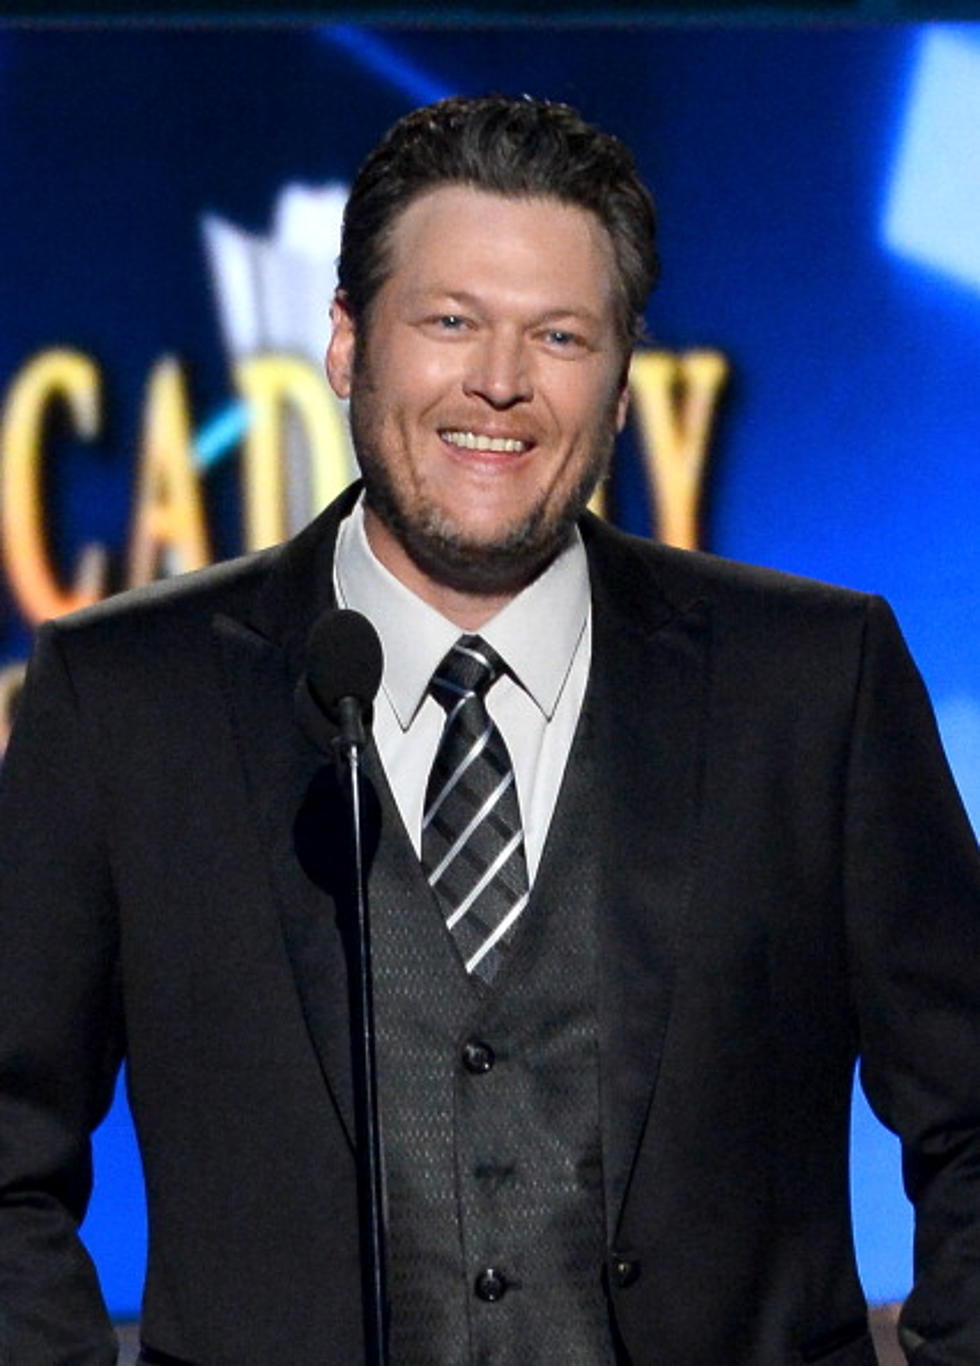 Blake Shelton Tweets Adam Levine’s Personal Cell Phone Number